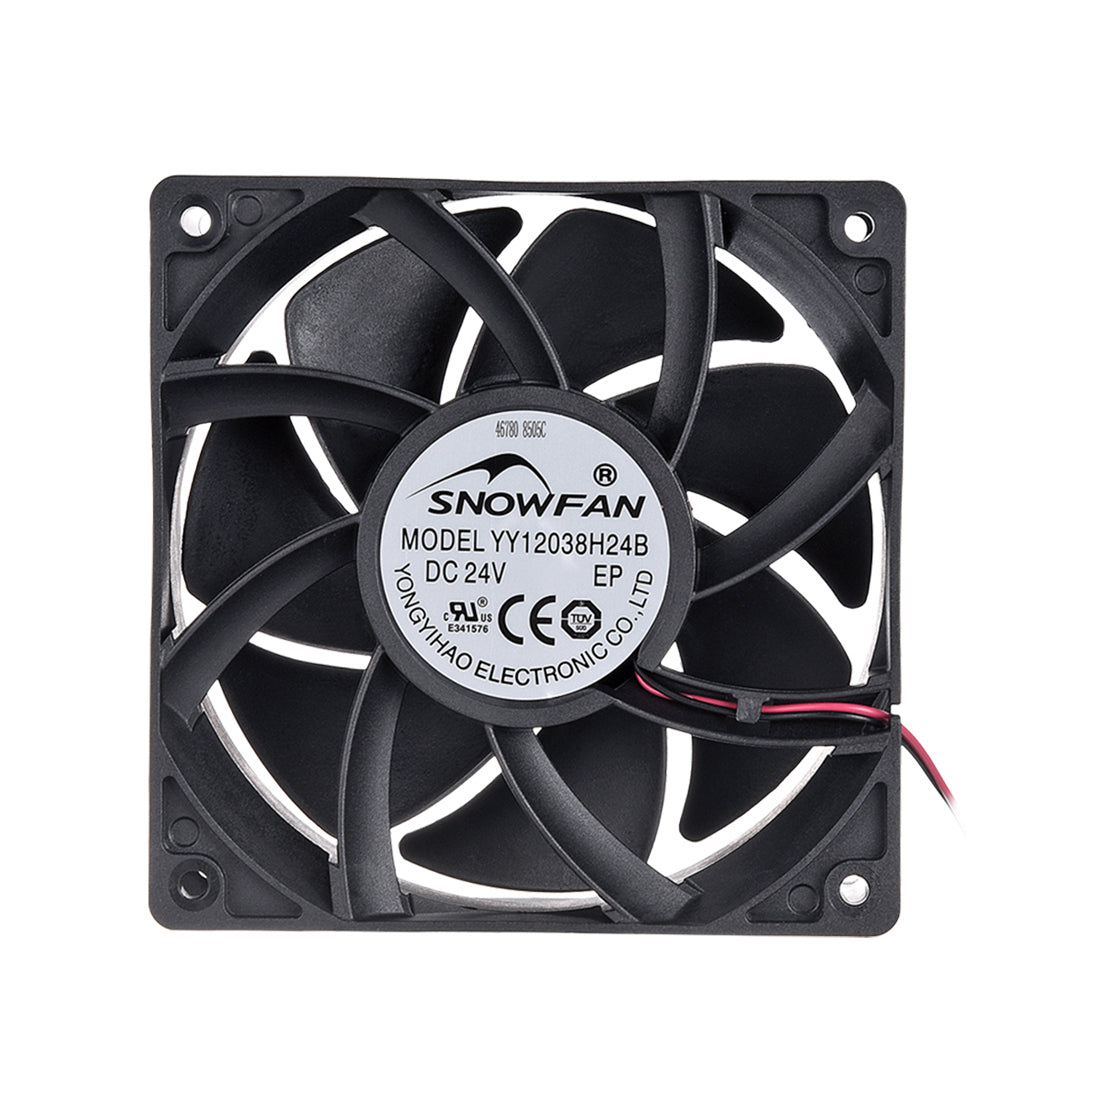 uxcell Uxcell SNOWFAN Authorized 120mm x 120mm x 38mm 24V Brushless DC Cooling Fan #0344